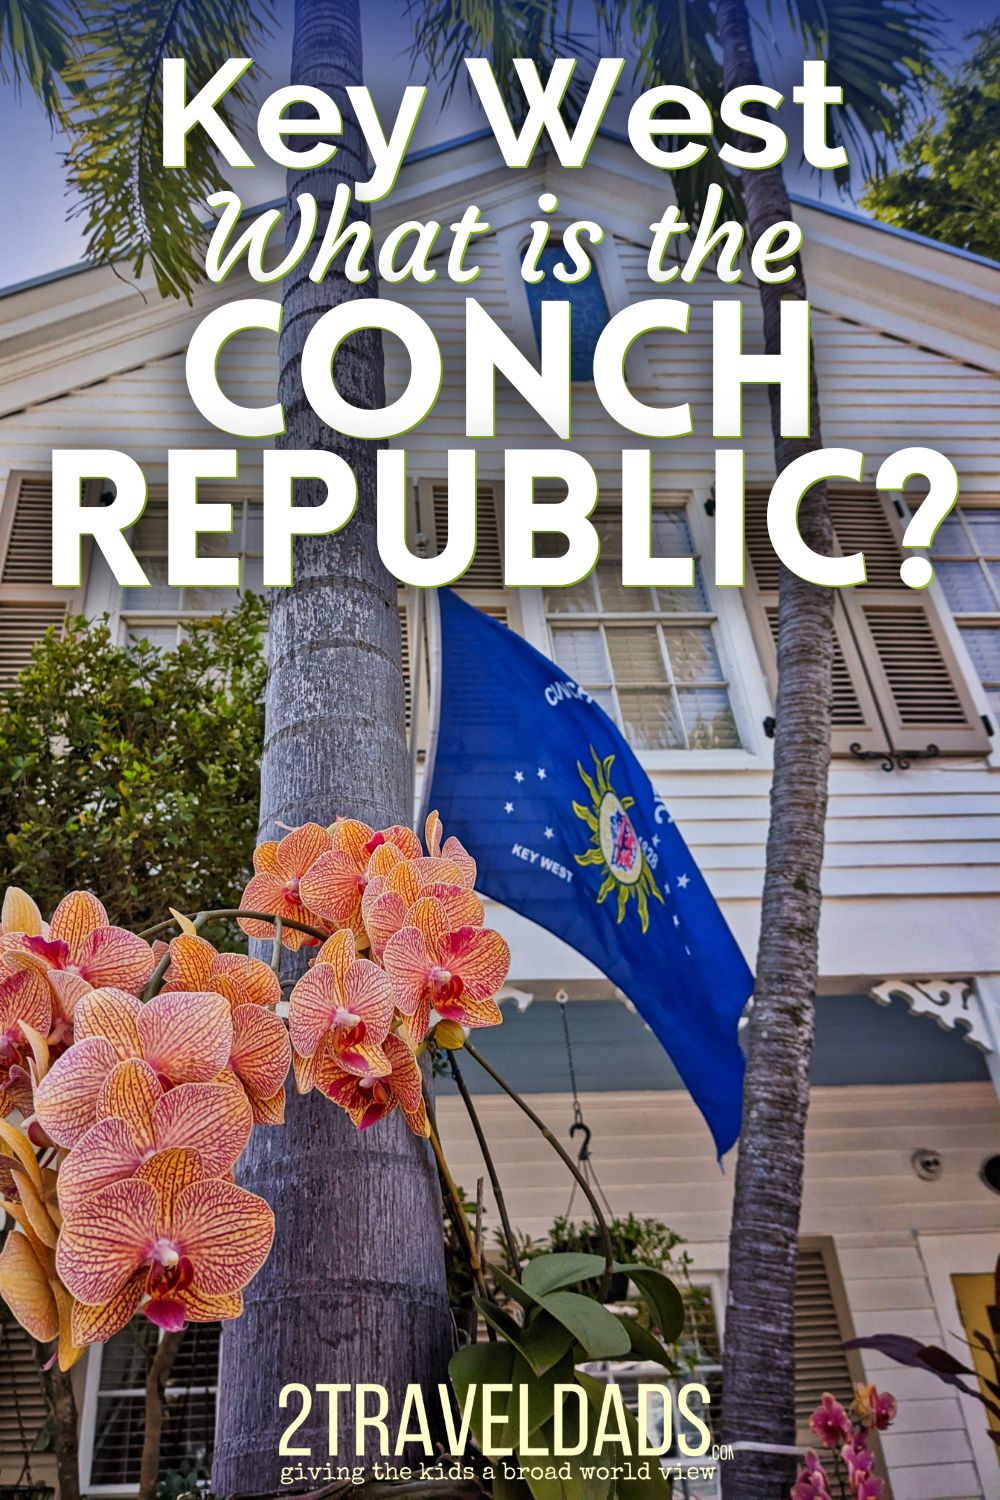 Why is Key West called the Conch Republic? We've got the answers and just what makes Key West the sort of place that stands up and stands out for individuals. It's more than a historic town.